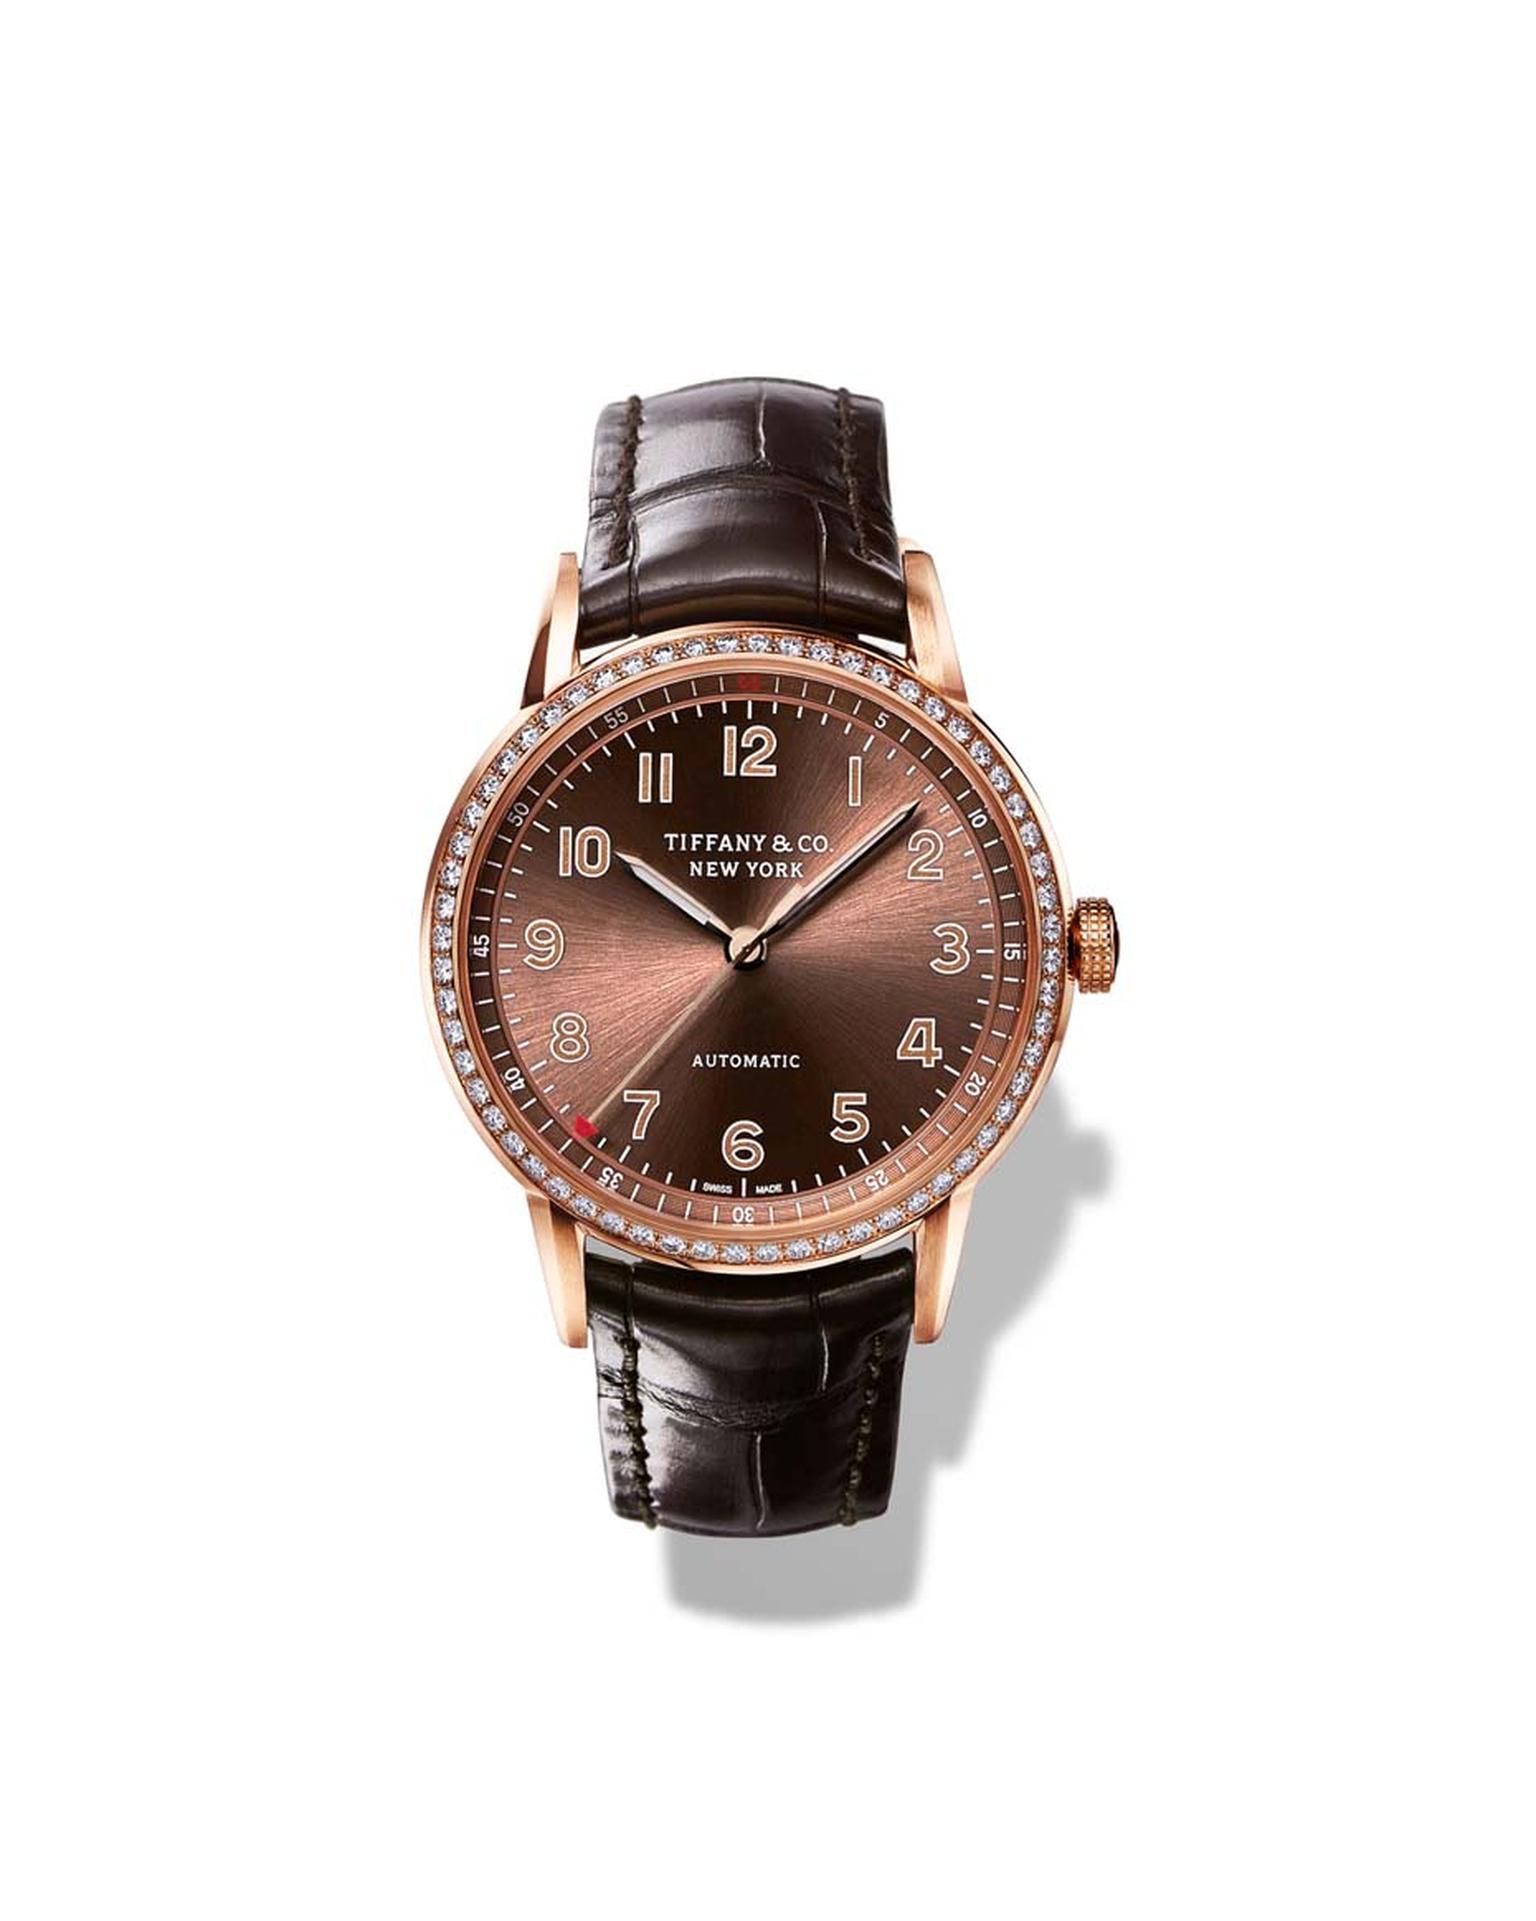 The new CT60 collection of Tiffany watches was inspired by a timepiece made for President Roosevelt in 1945. Pictured is the 34mm CT60 3-Hand ladies' watch in rose gold, with a brown sunray dial and round-cut brilliant diamonds on the bezel.